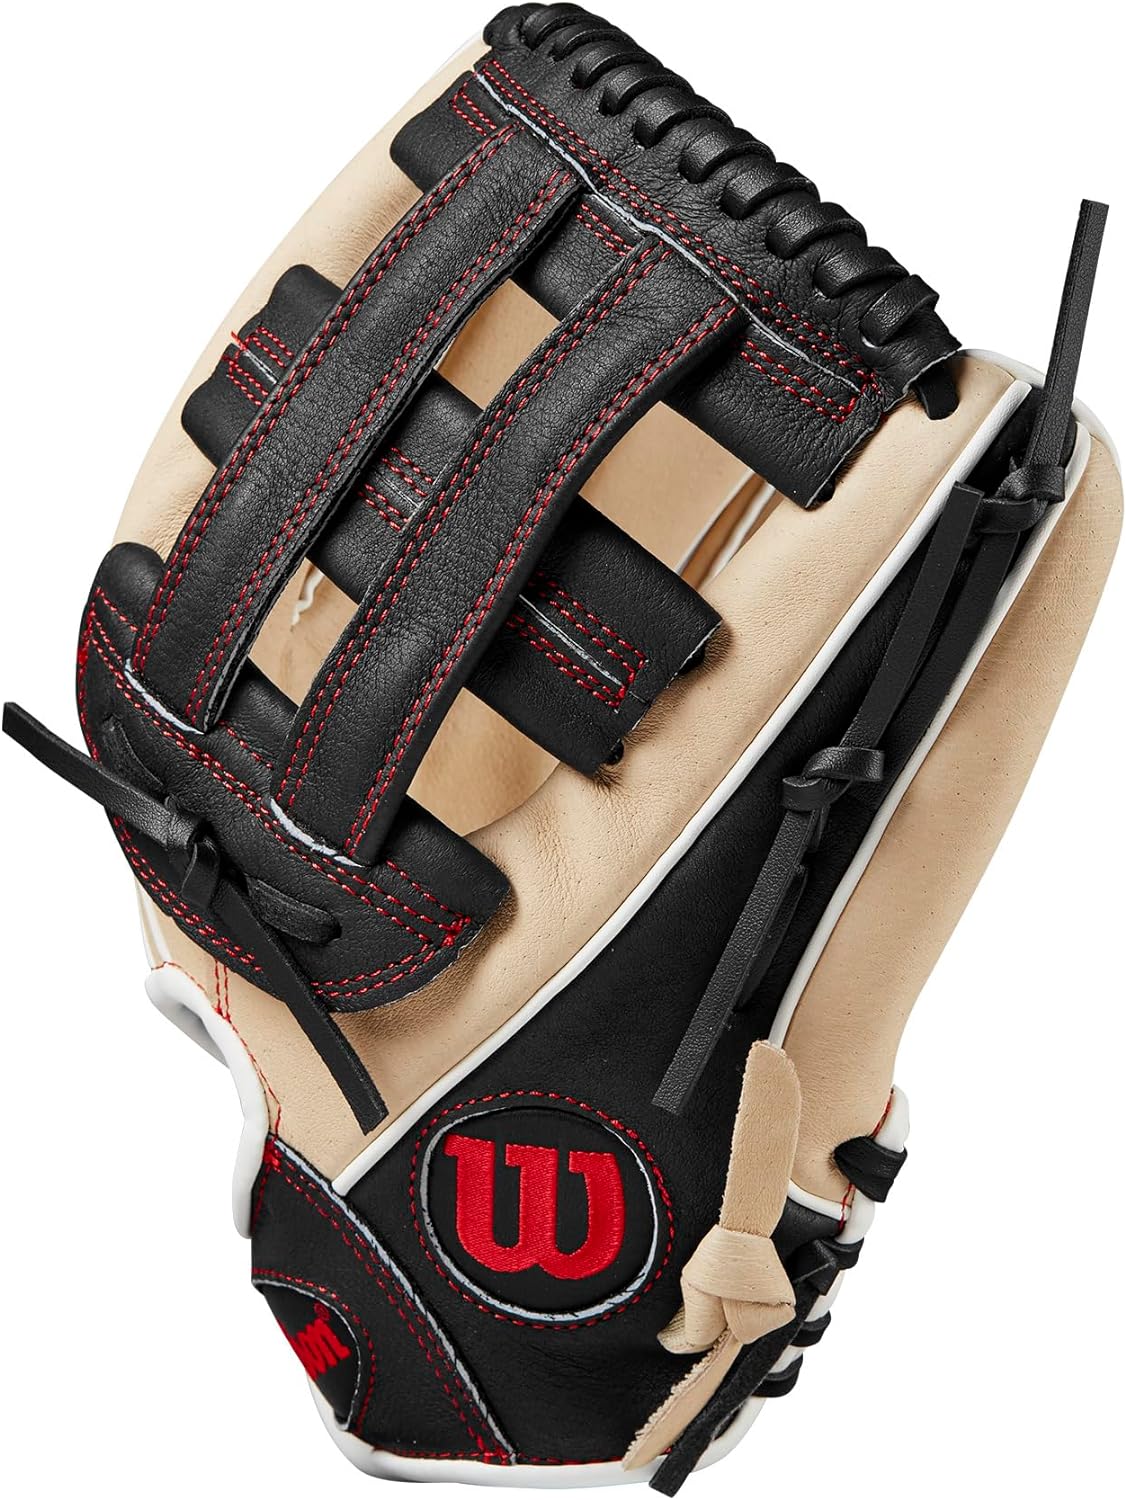 Baseball Glove - A450 - Youth - Leather - Quick Fit